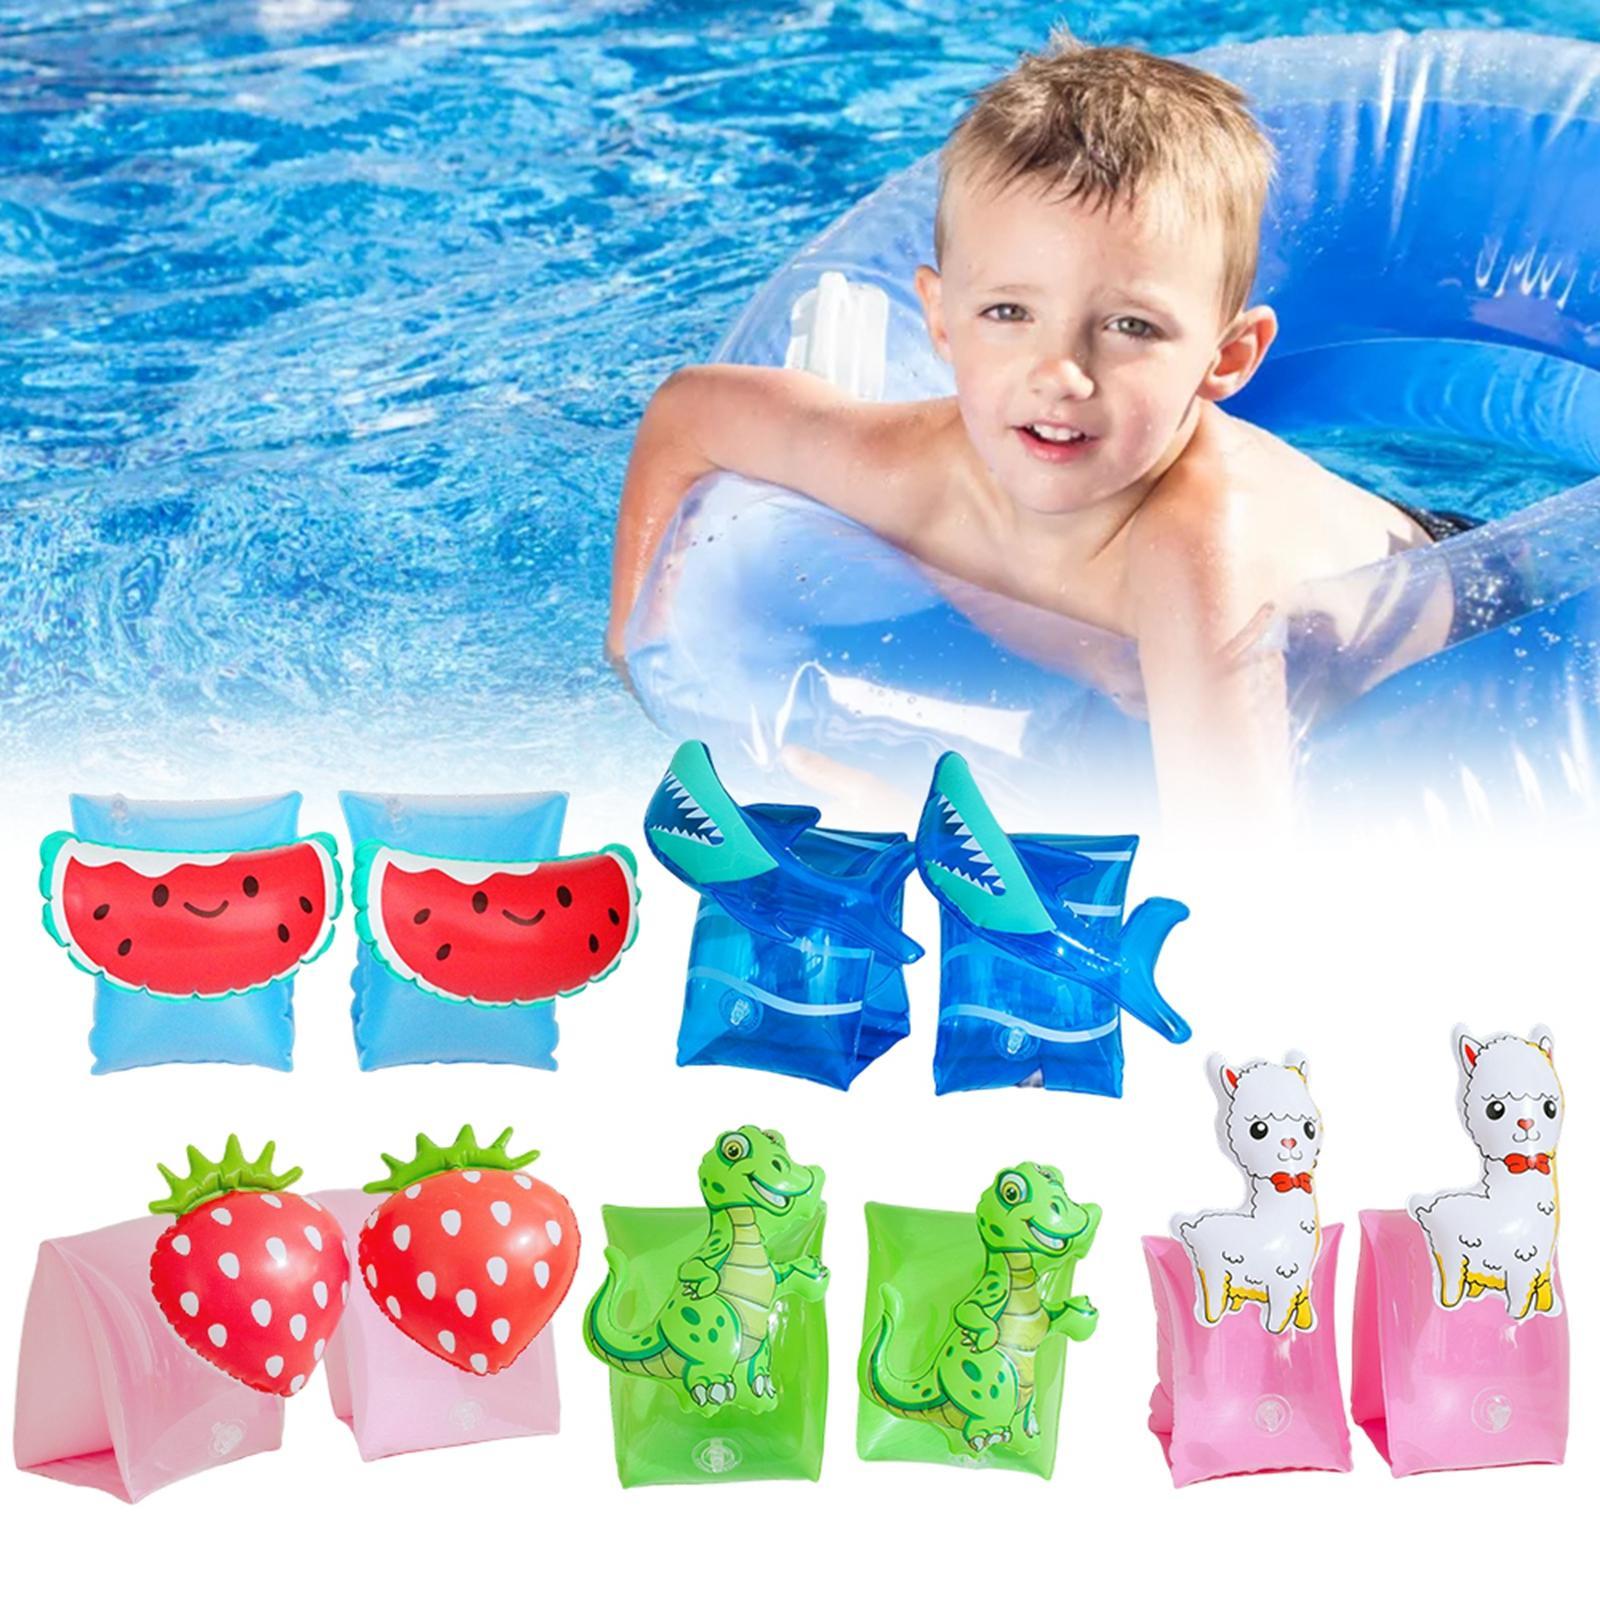 2x Inflatable Armbands for Kids Swim Sleeves Float Floats Child